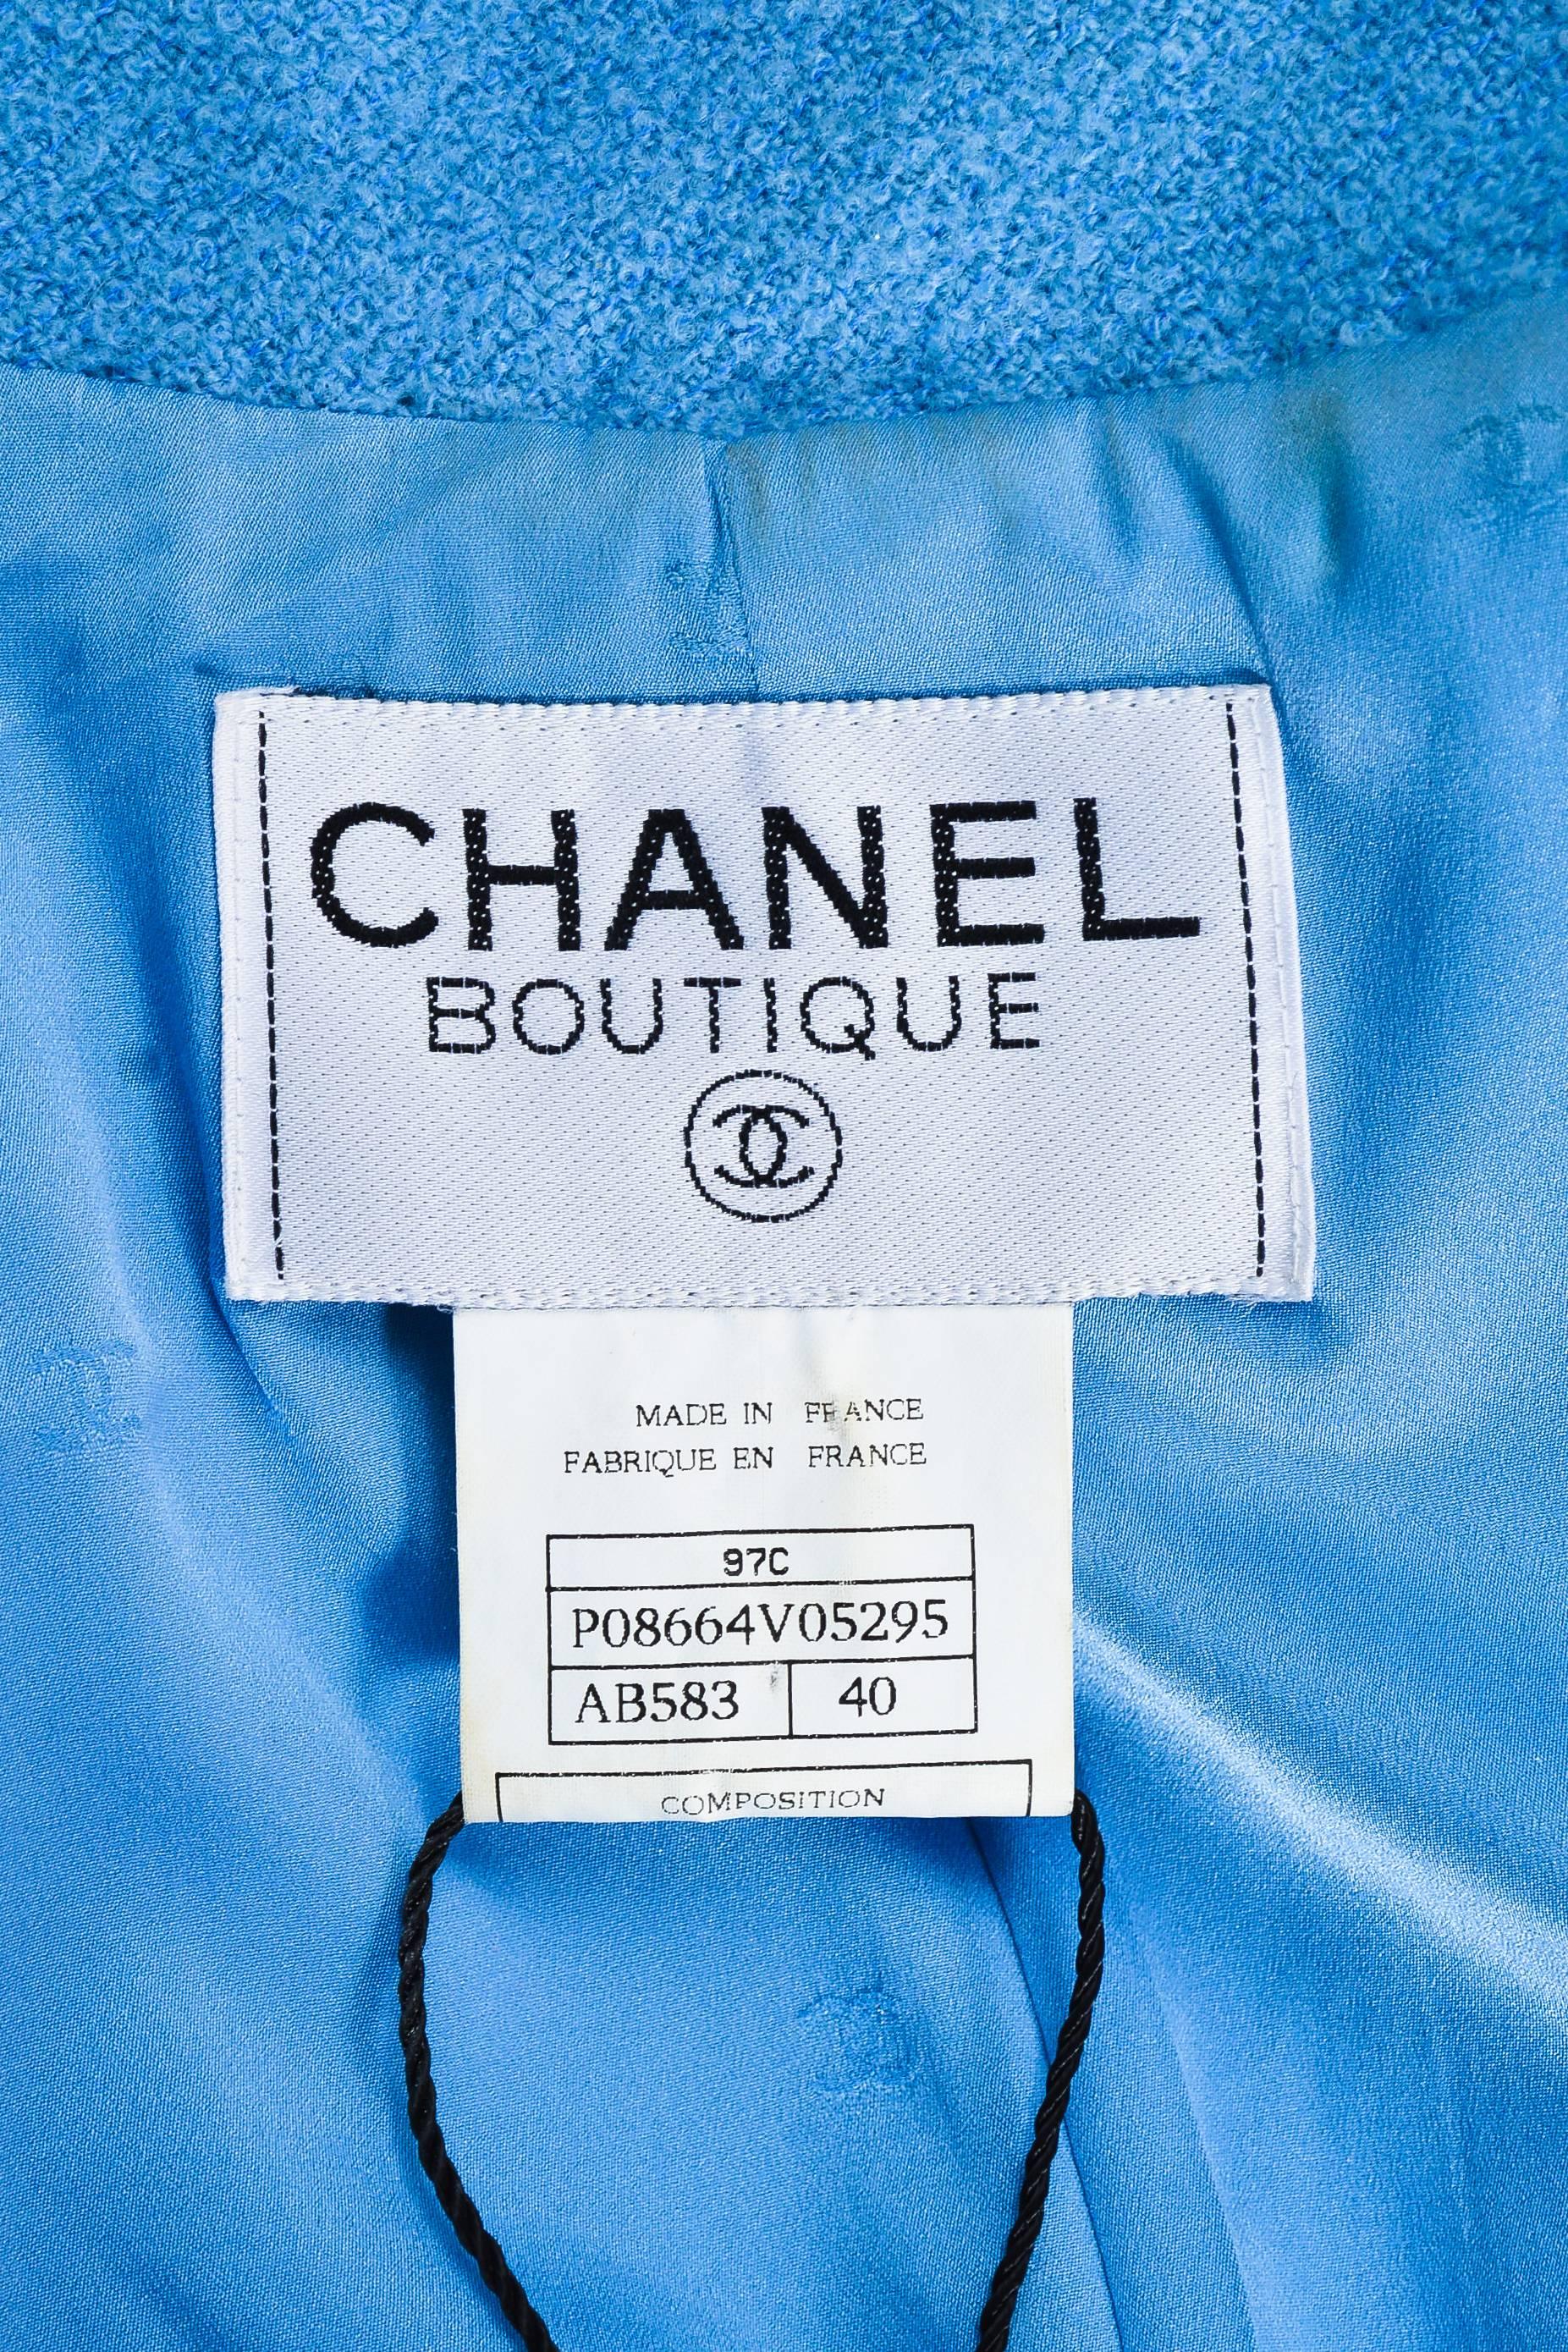 Chanel Boutique Baby Blue Wool Double Breasted Four Pocket LS Jacket SZ 40 For Sale 1